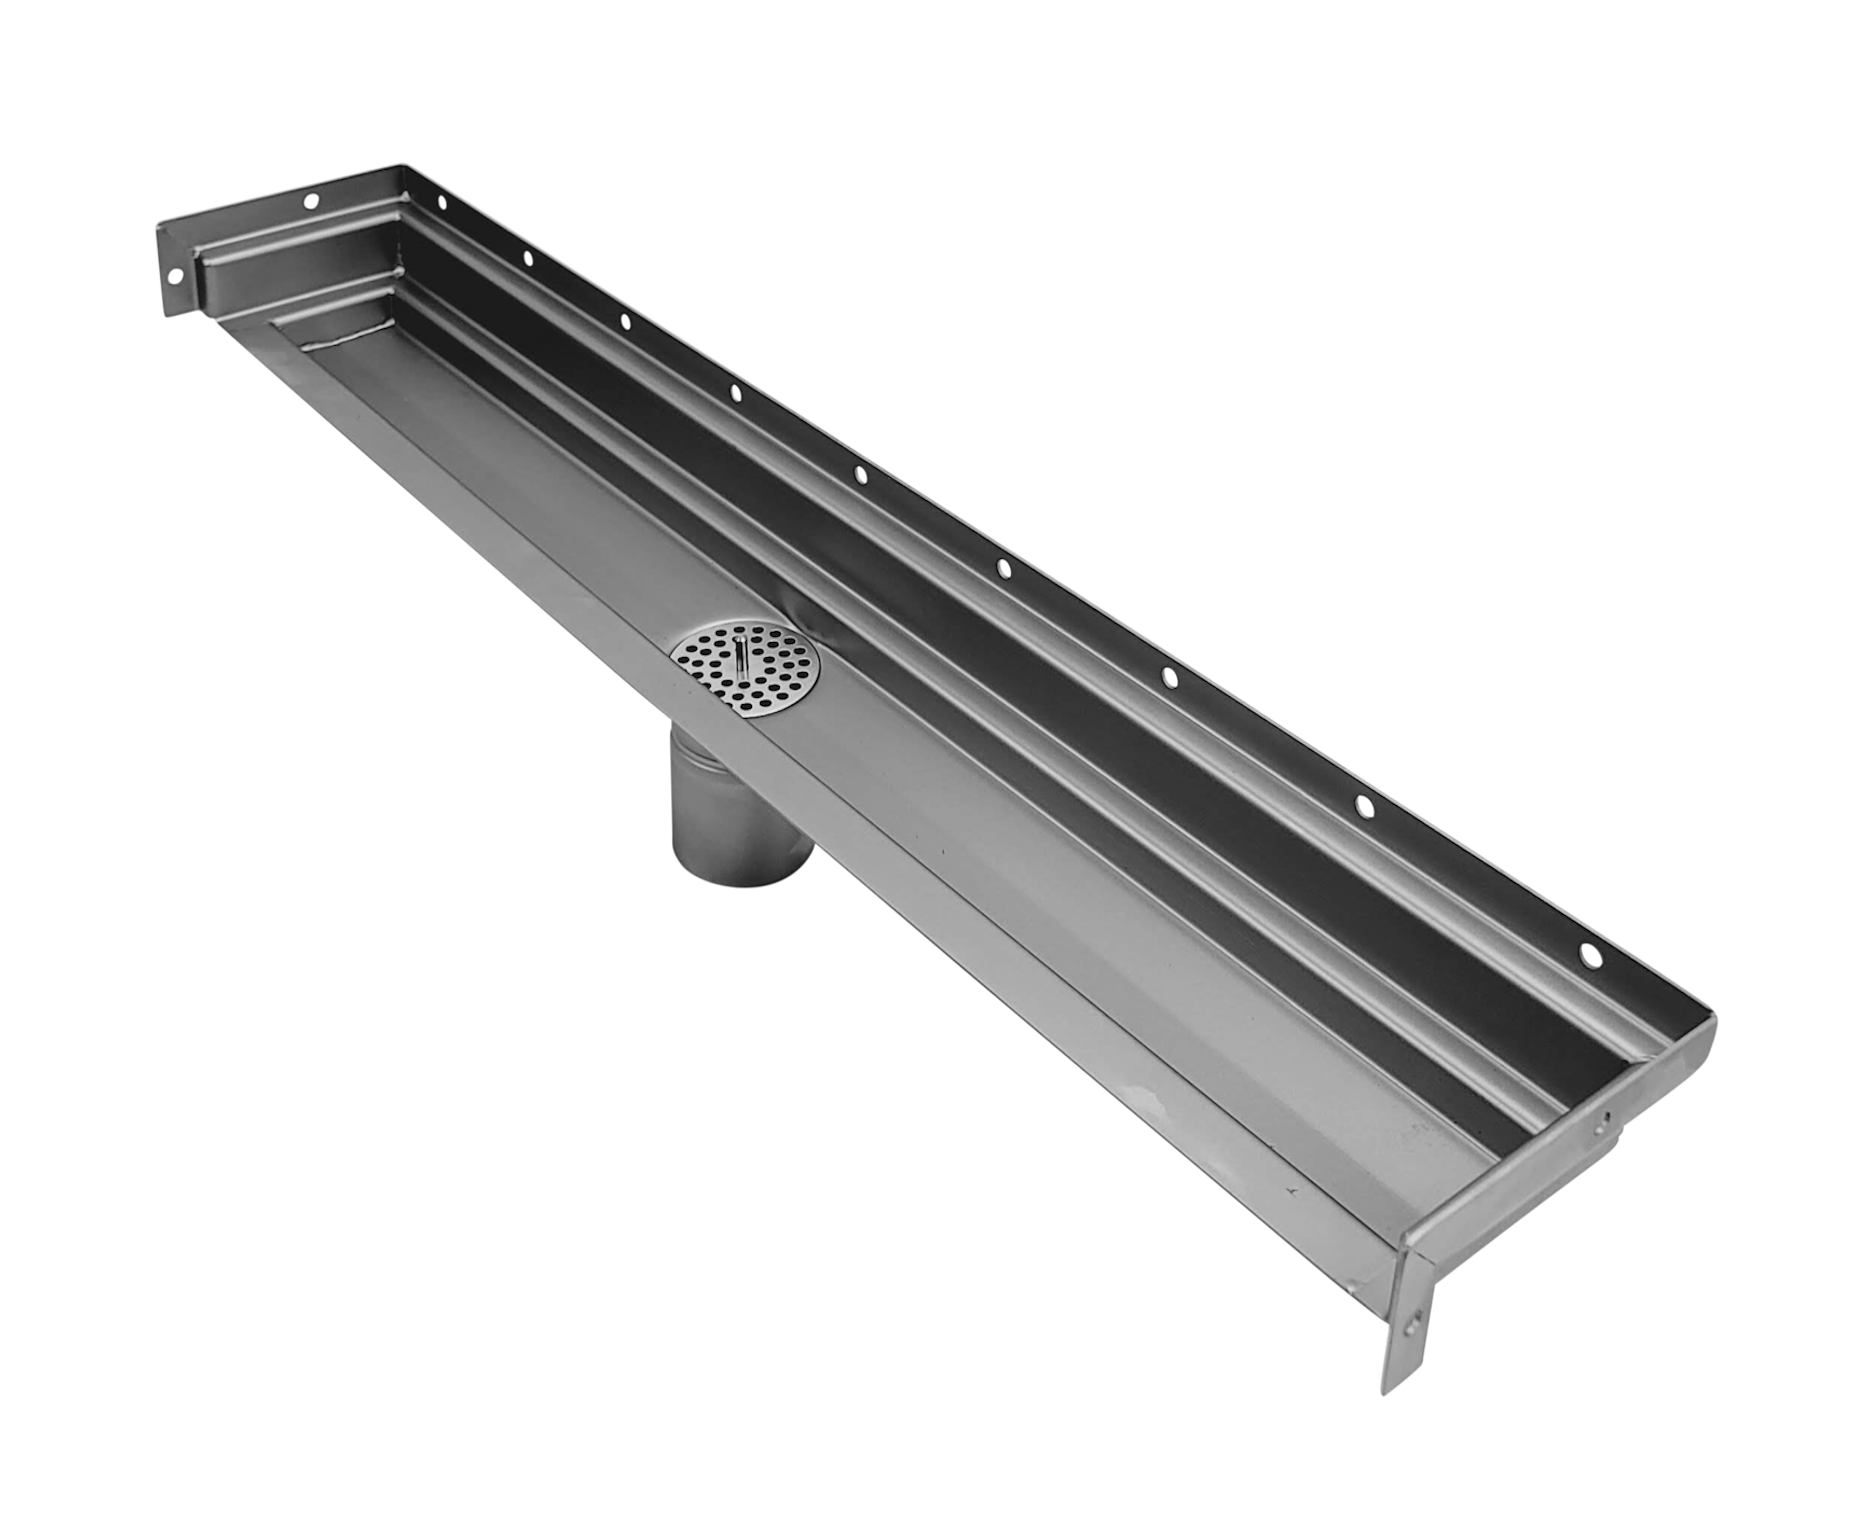 34 Inch Tile Insert Linear Drain, Wall Mount Three Side Return Flange, Drains Unlimited